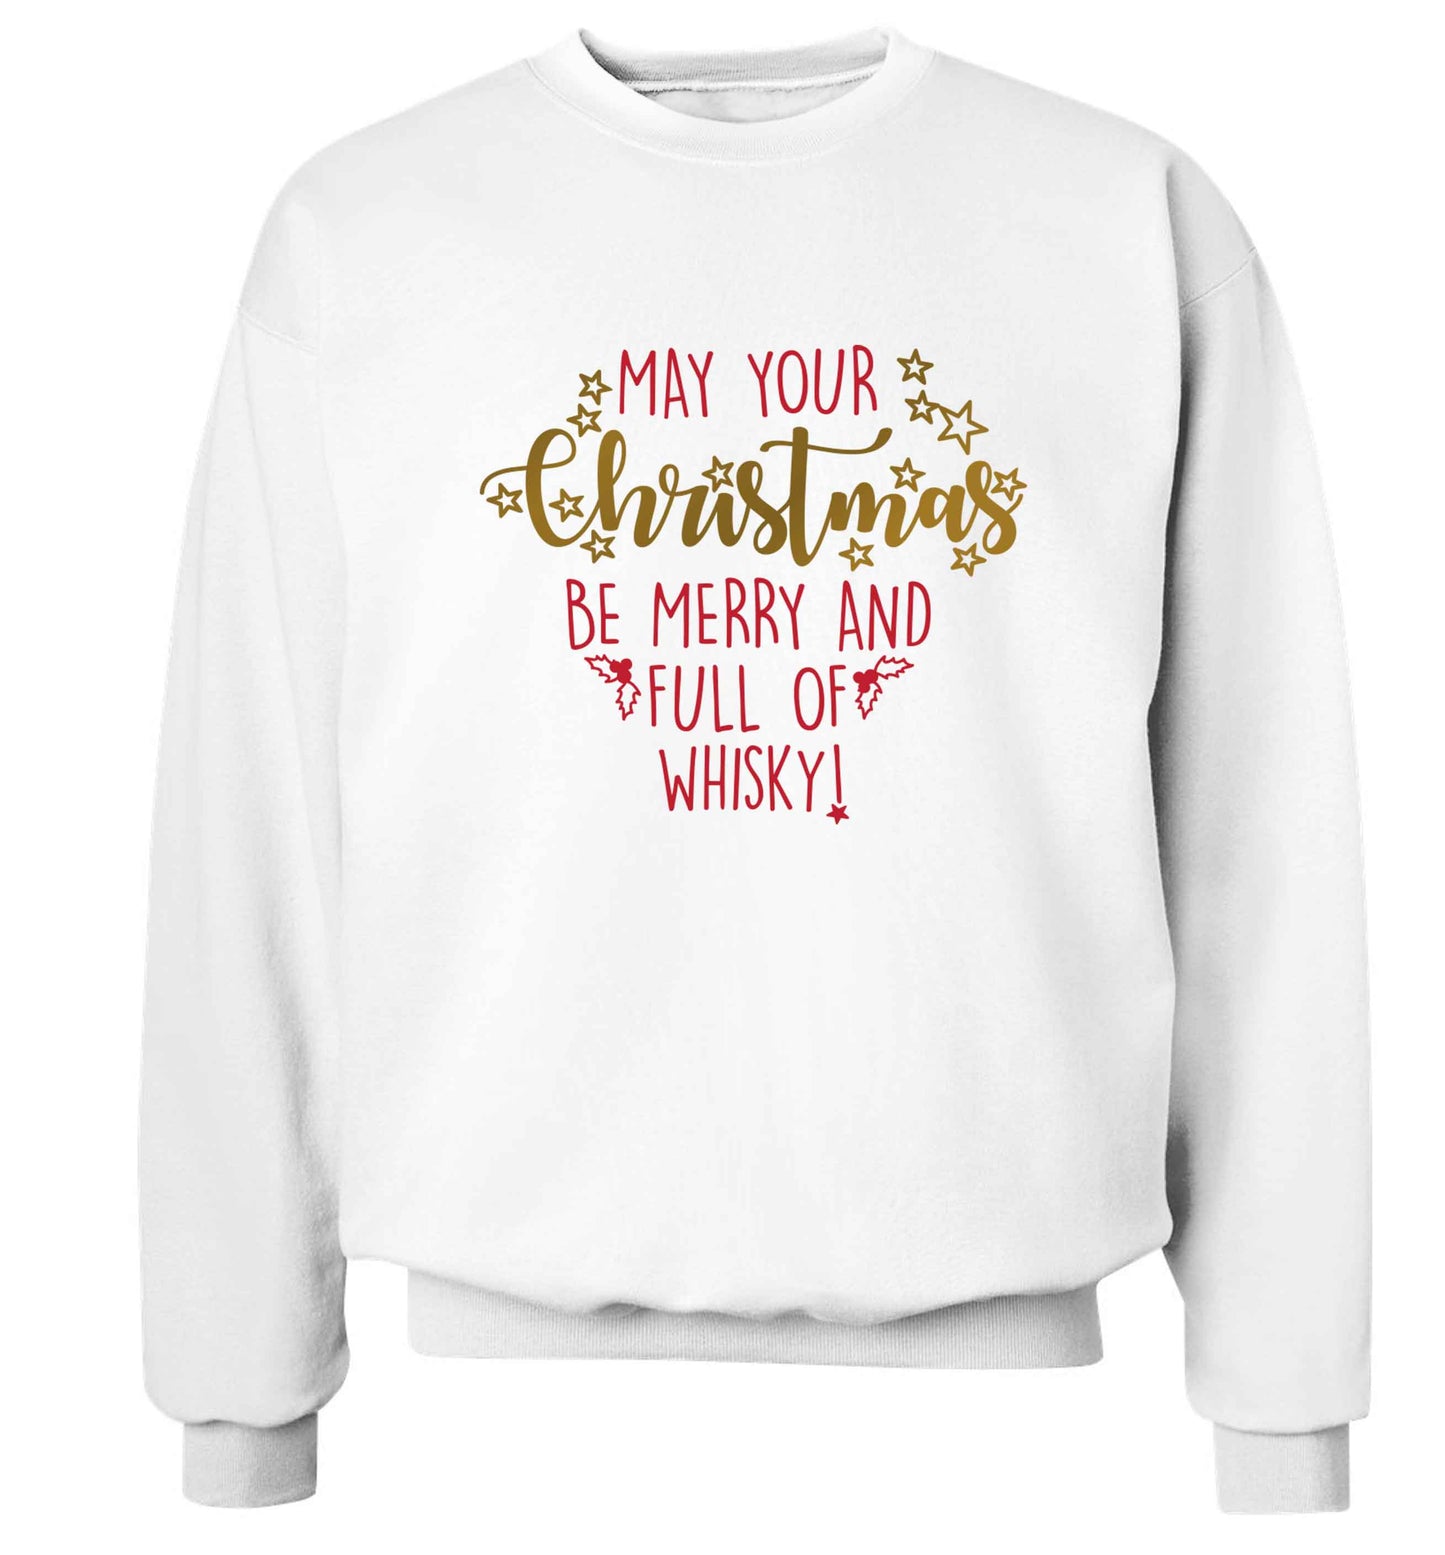 May your Christmas be merry and full of whisky Adult's unisex white Sweater 2XL